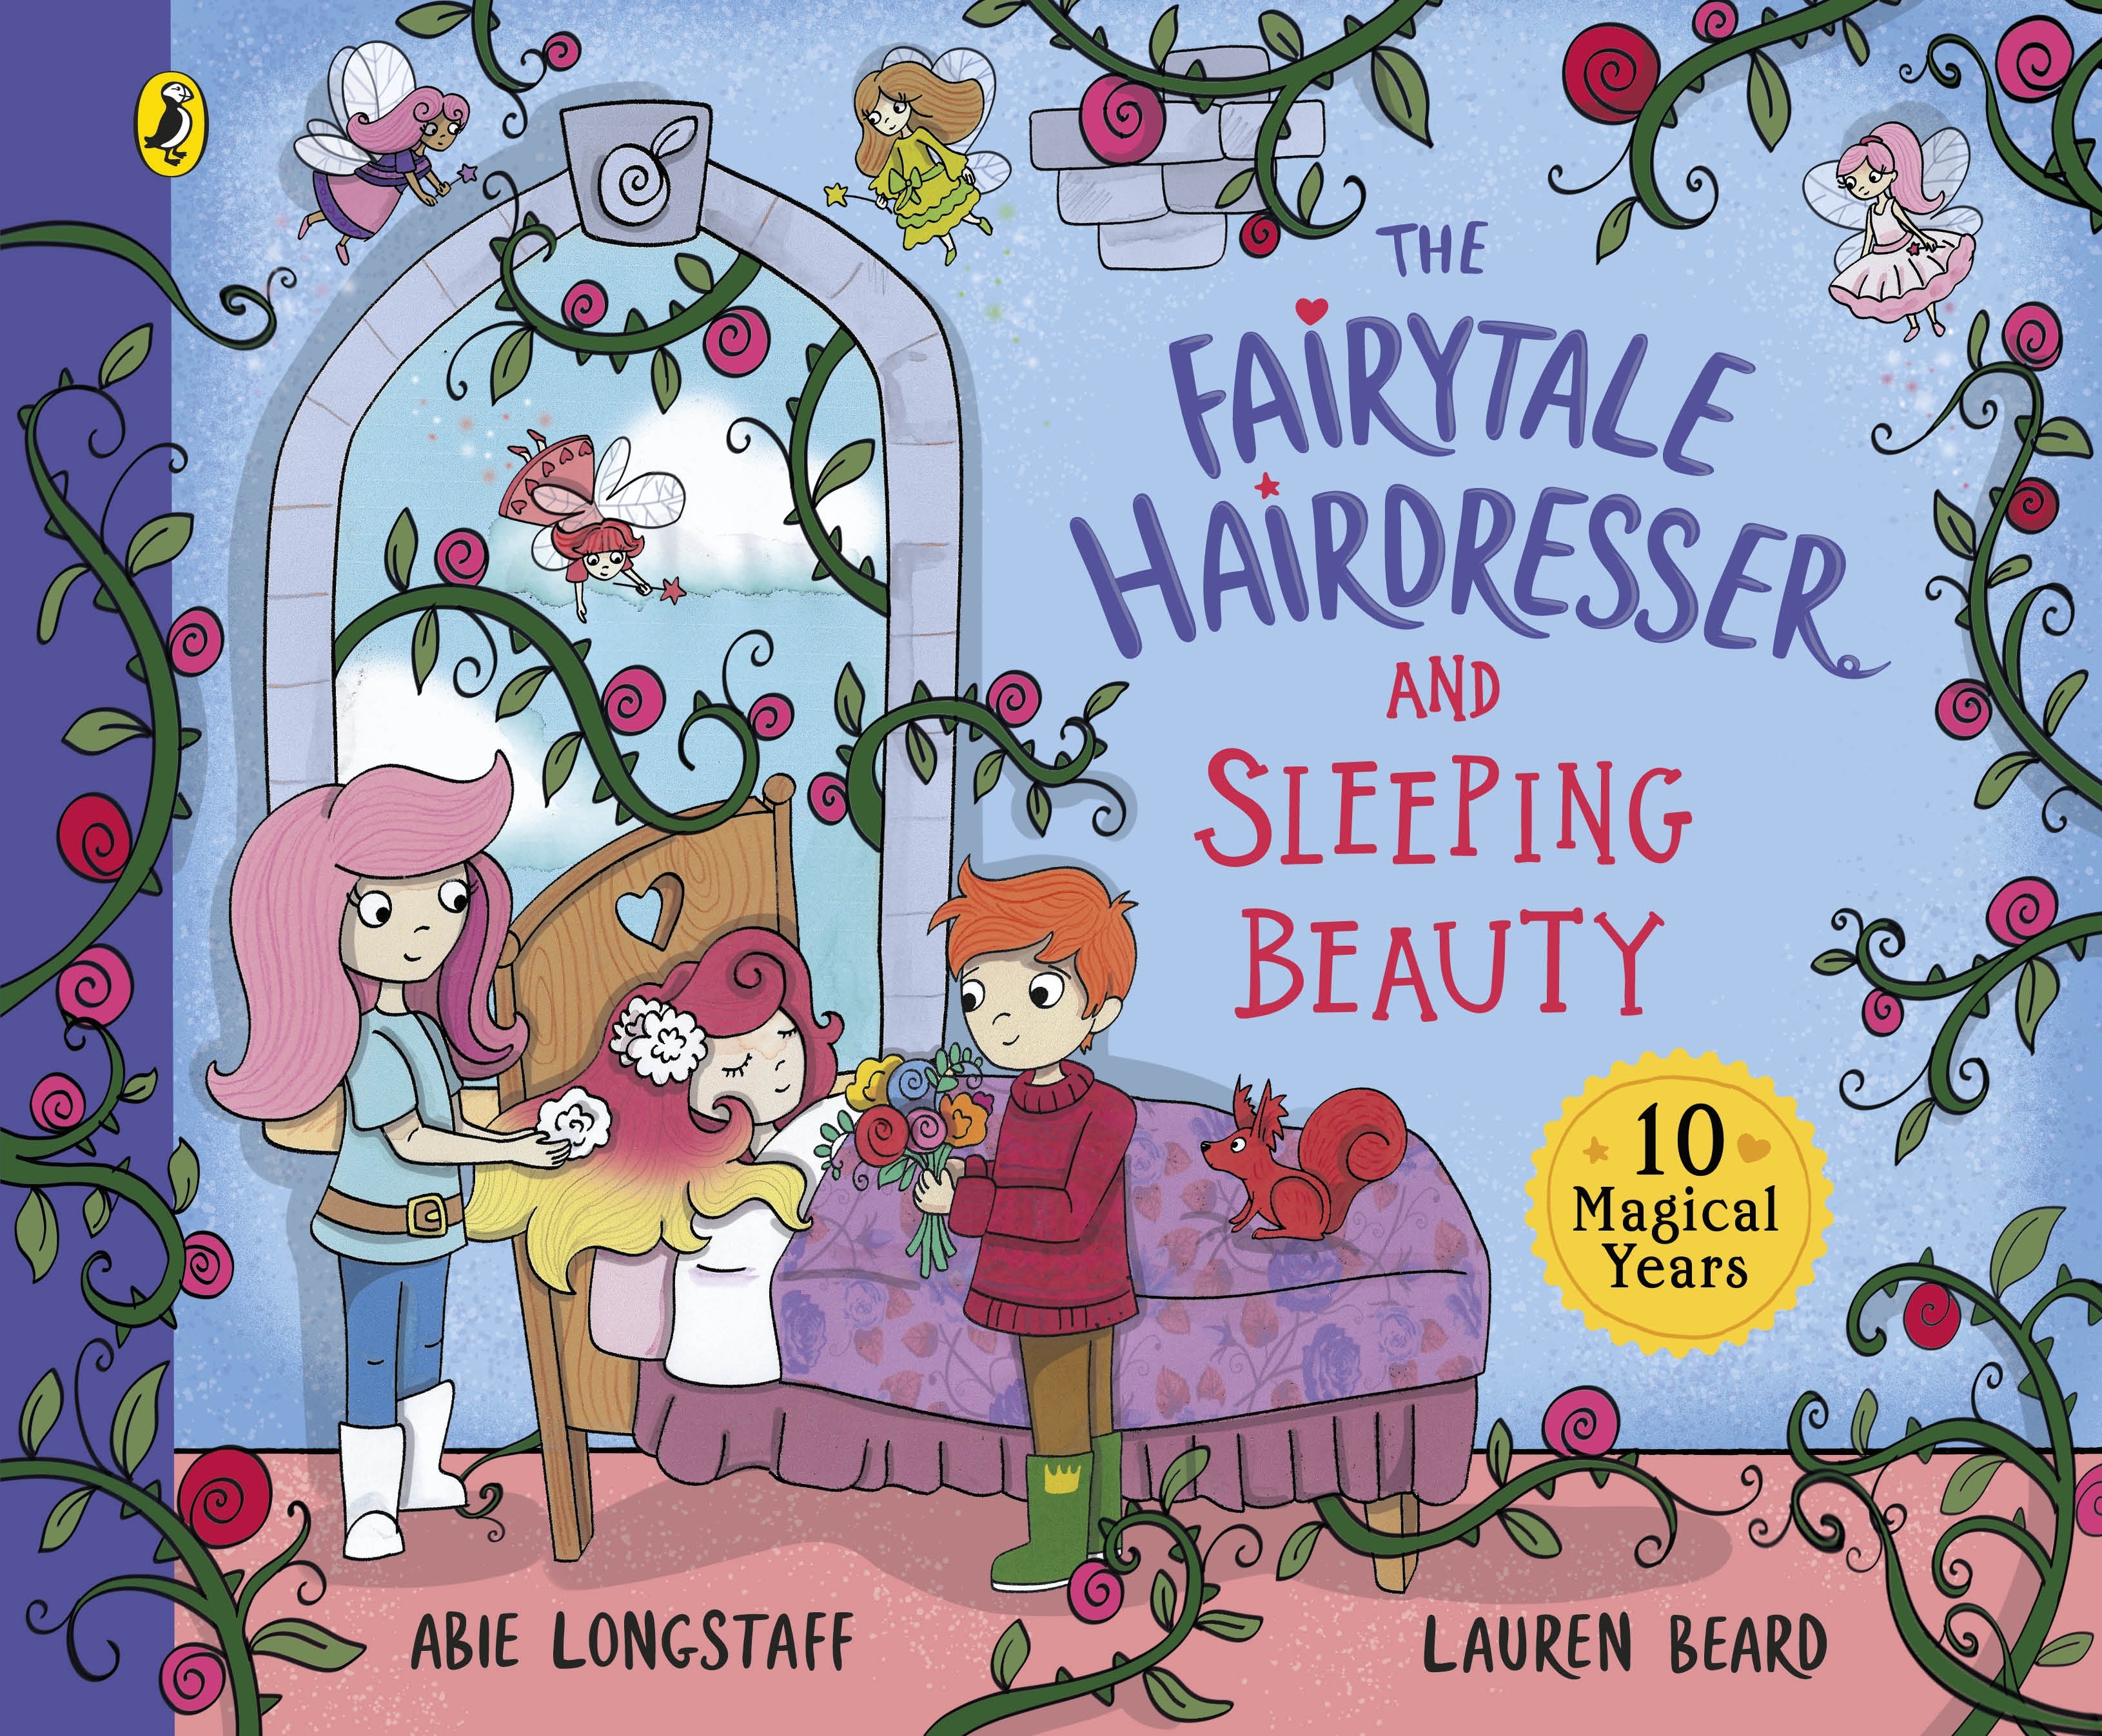 Book “The Fairytale Hairdresser and Sleeping Beauty” by Abie Longstaff — March 17, 2022